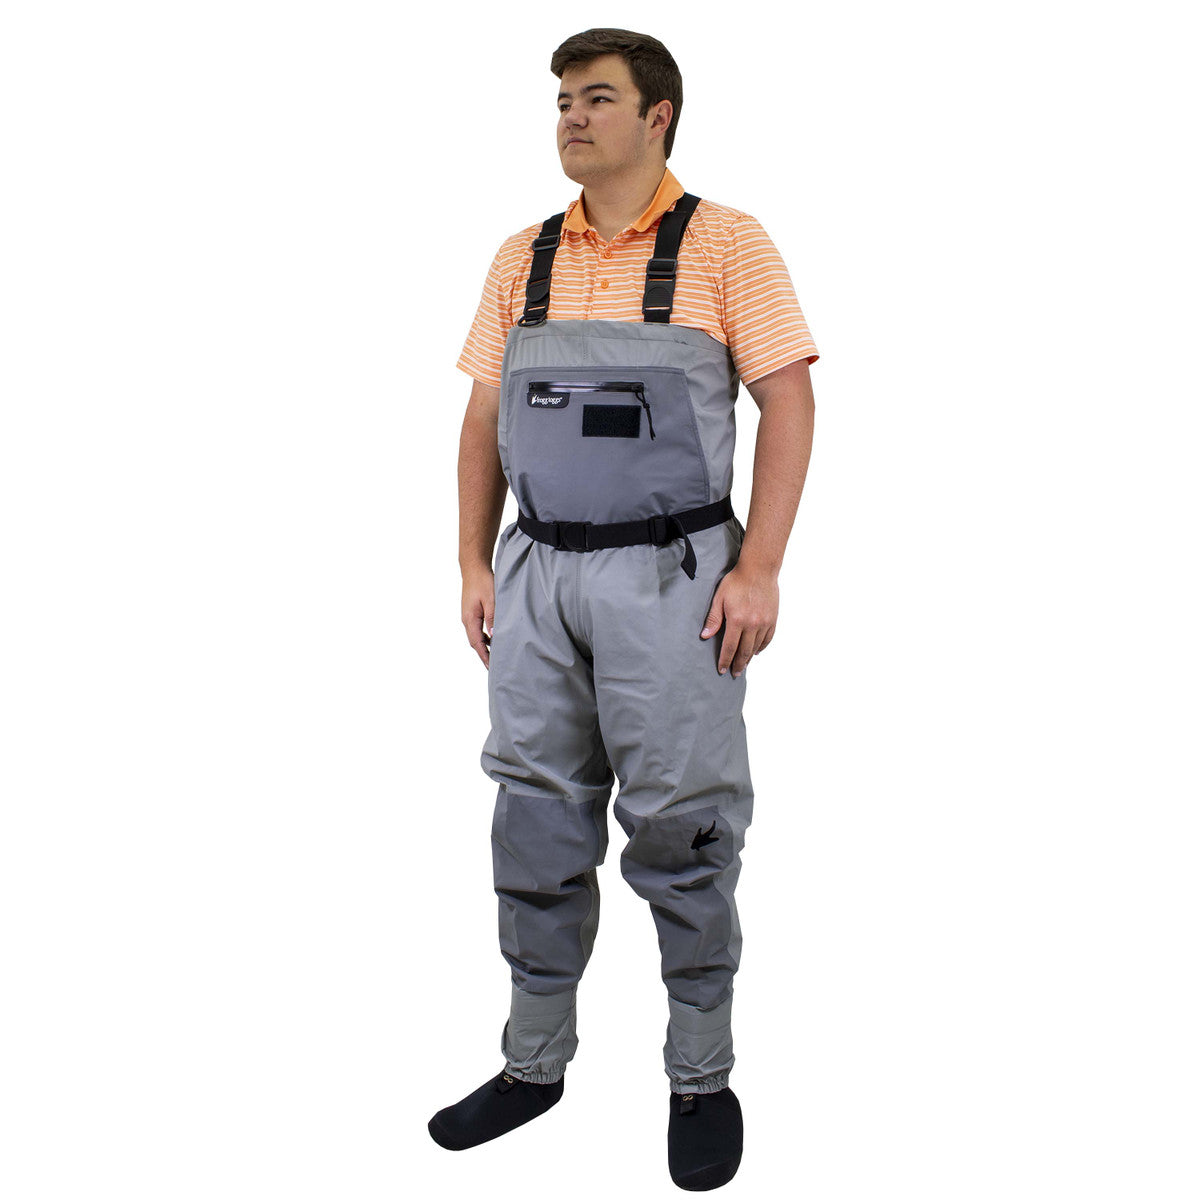 FROGG TOGGS MENS HELLBENDER 2.0 SF CHEST WADER